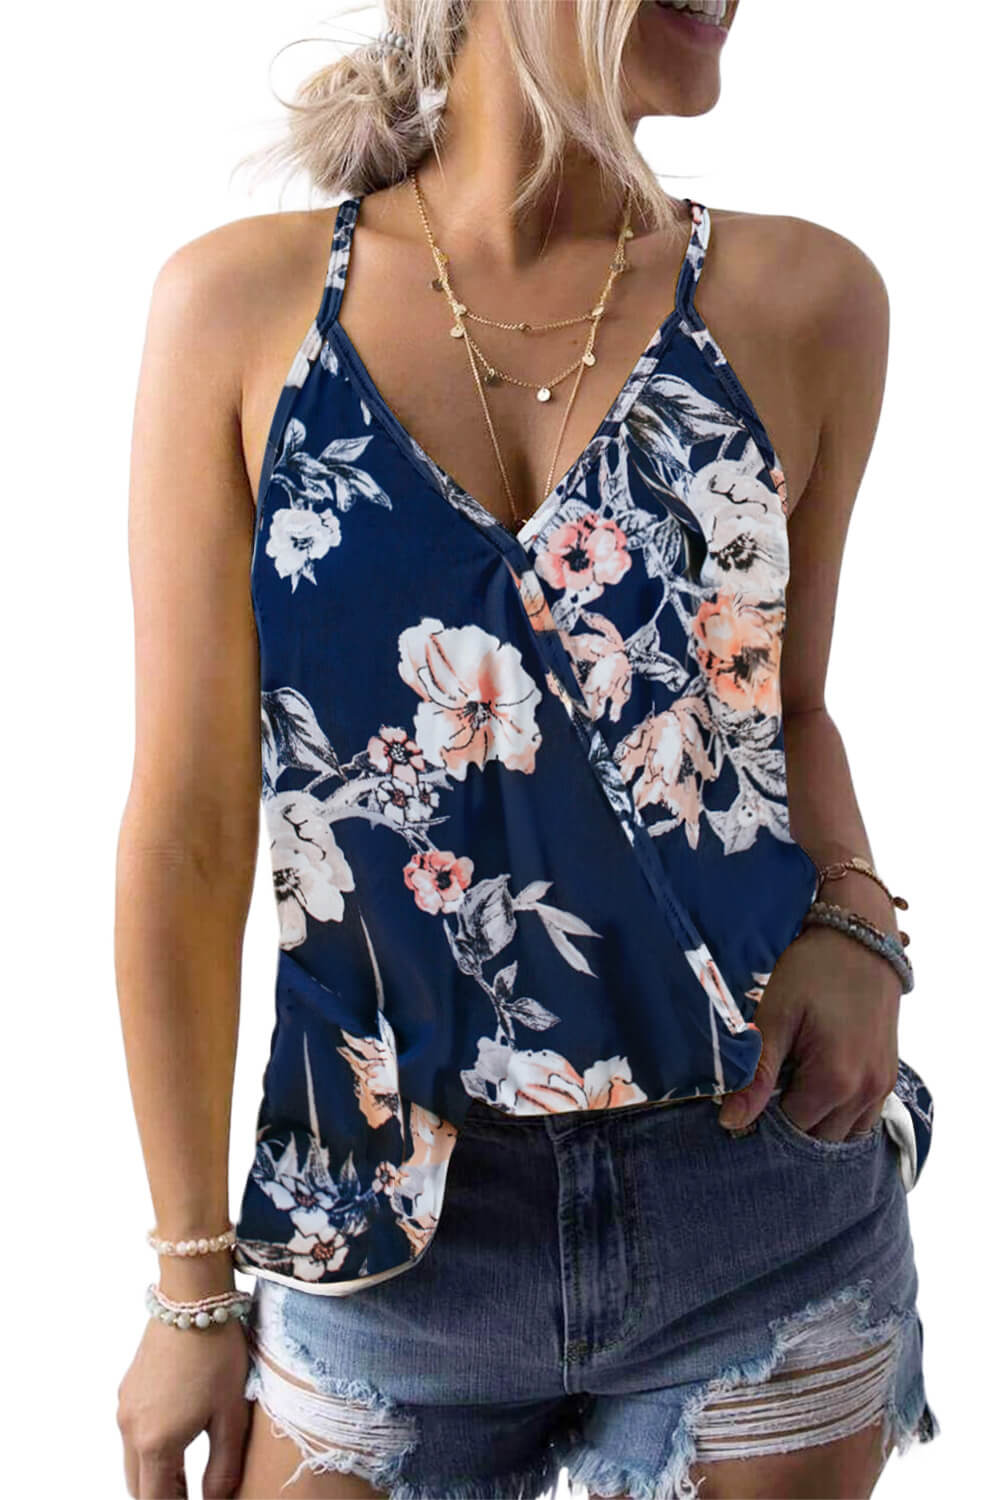 Aidy Women's Floral Print Sleeveless V-Neck Strappy Camisole Tank Top ...